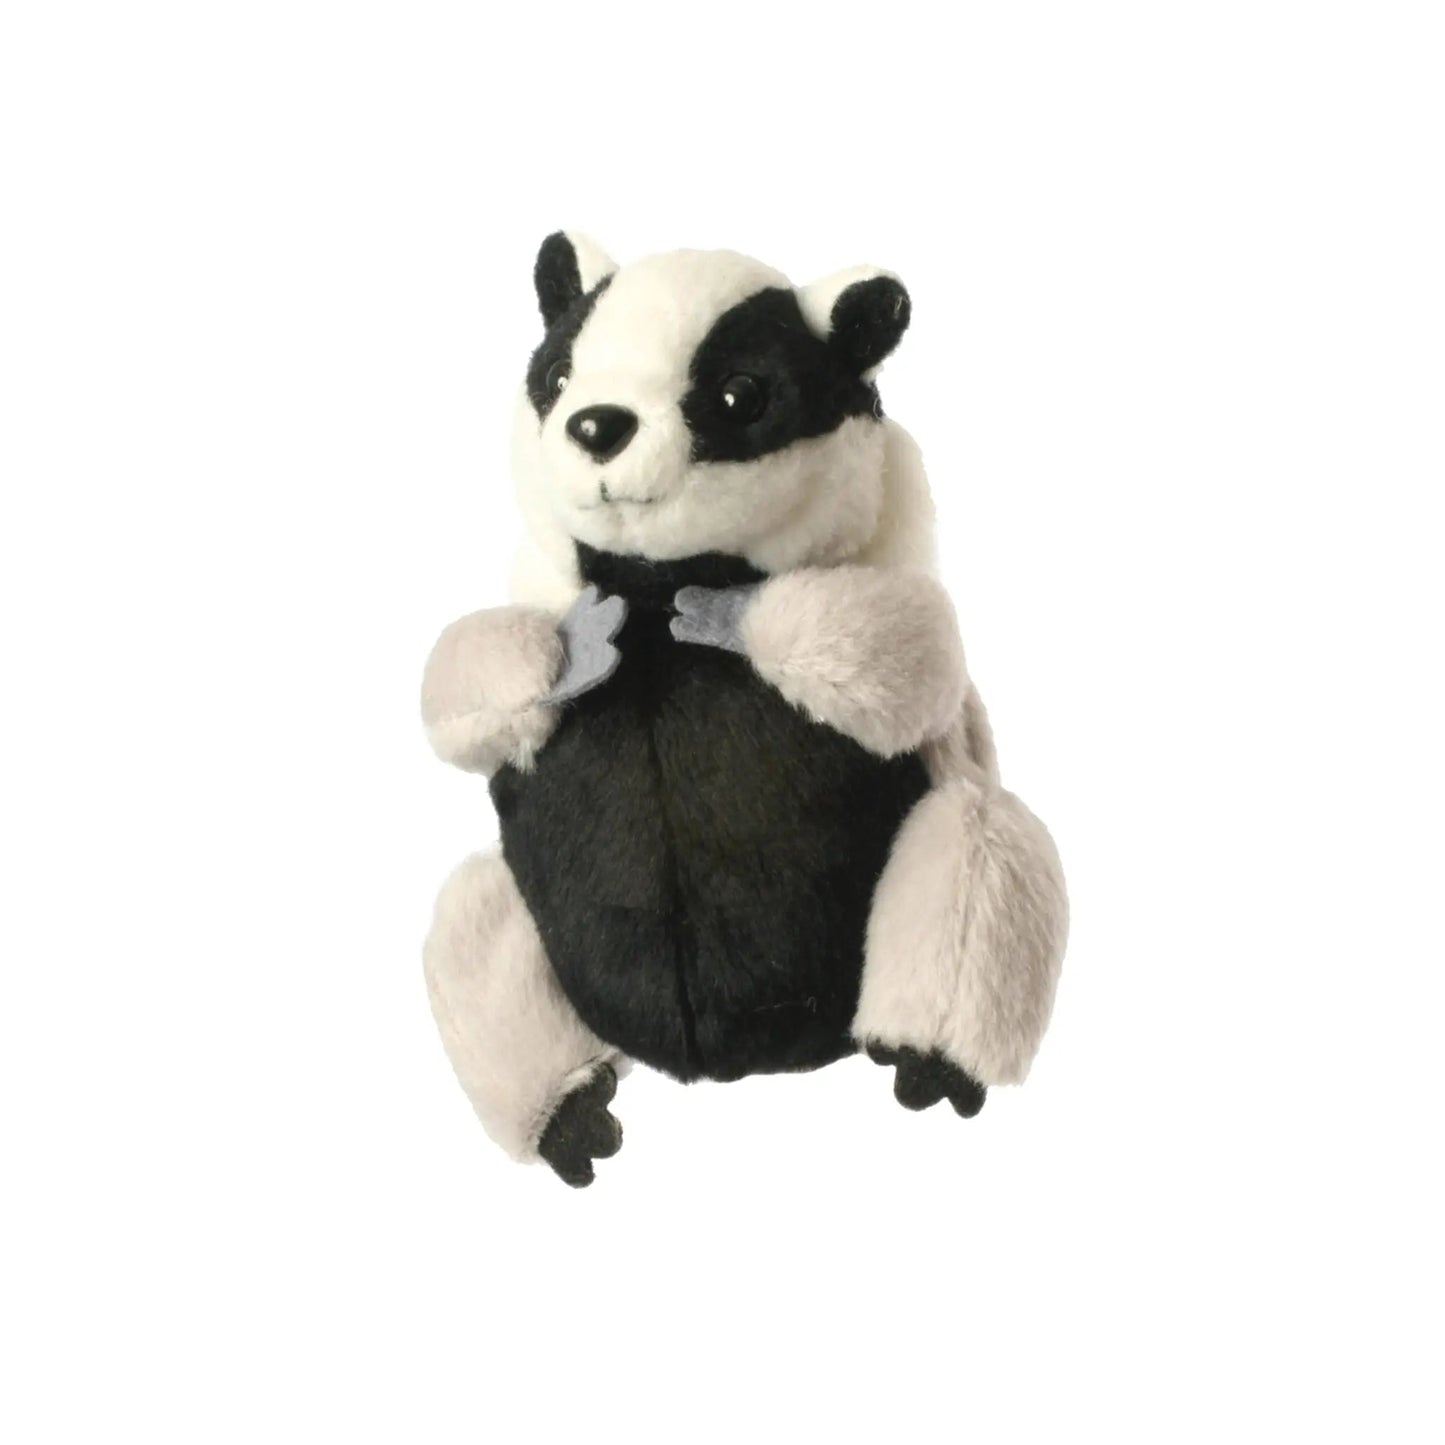 Badger Finger Puppet - The Puppet Company - The Forgotten Toy Shop